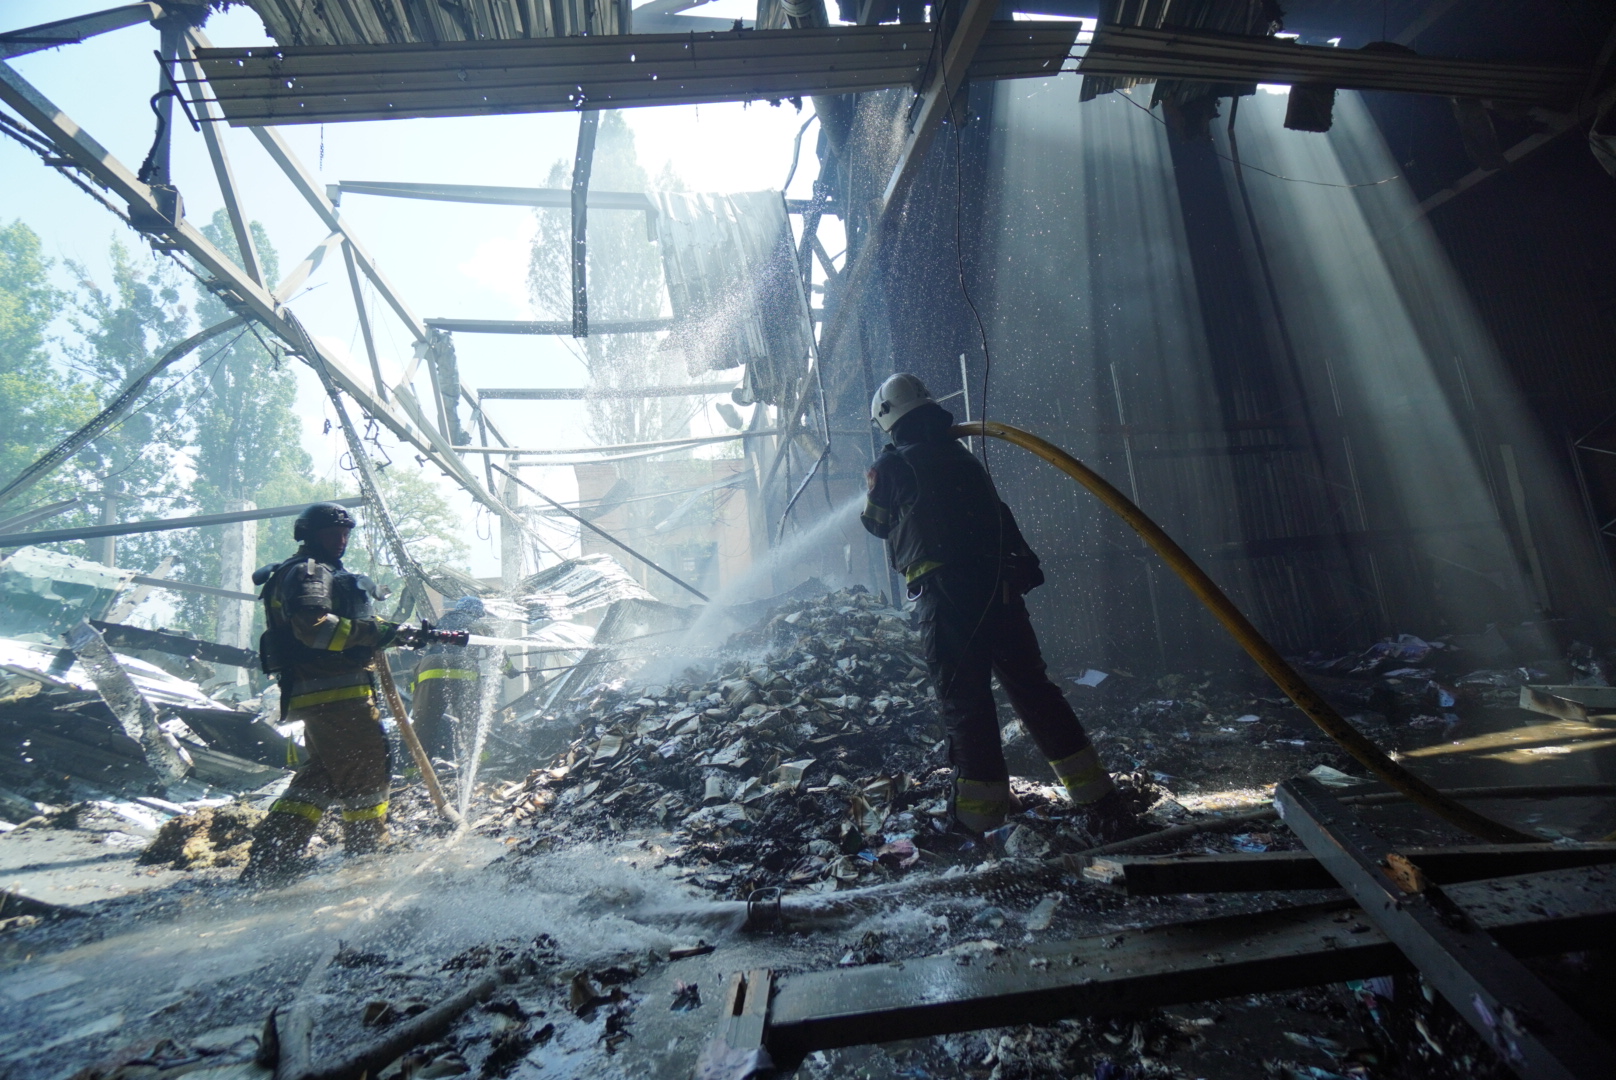 Emergency service workers are putting out the fire that caught the printing house in Kharkiv in the aftermath of Russian massive missile attack on Kharkiv on May 23 / Photo: Ivan Samoilov for Gwara Media